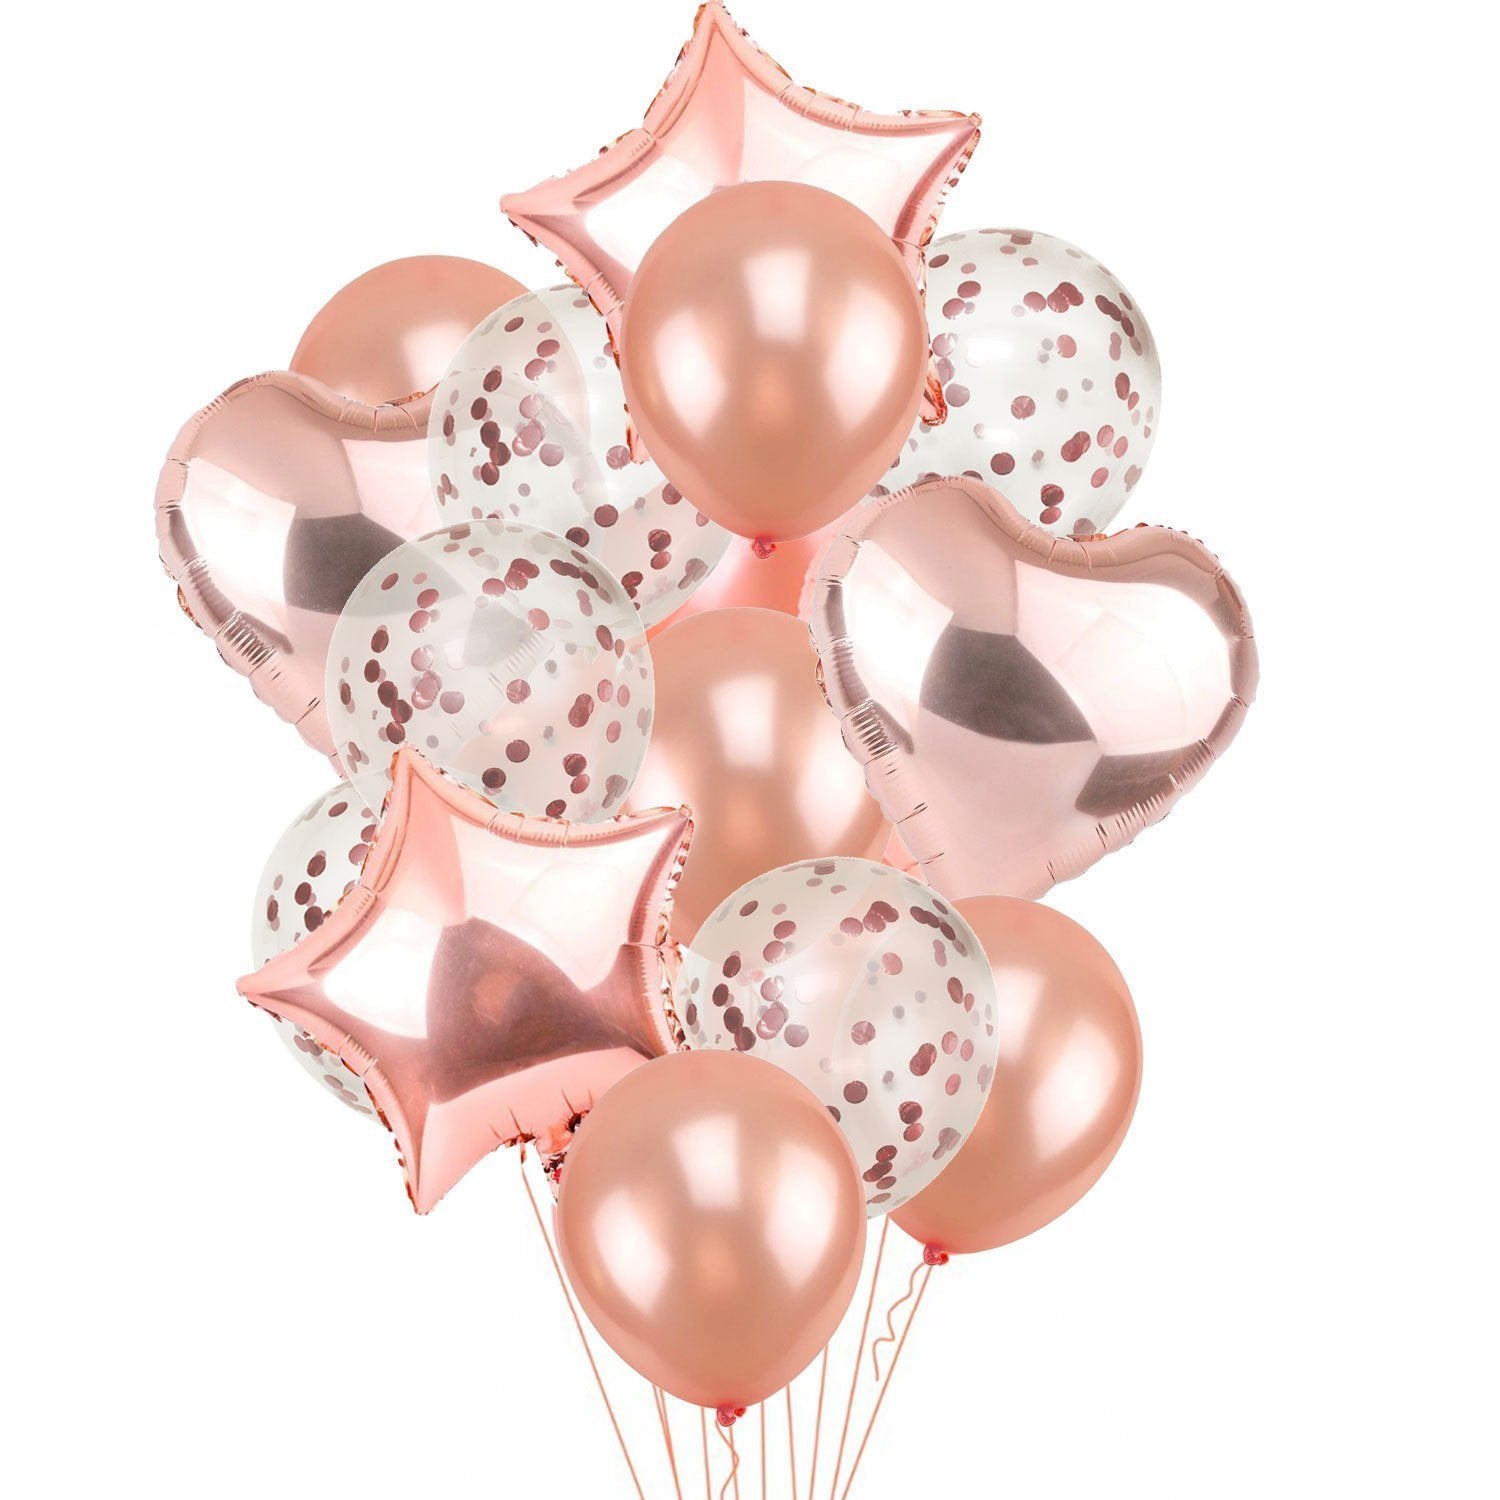 Rose Gold Star Heart Foil Confetti Latex Balloon Bouquet - 14 Pieces - Online Party Supplies